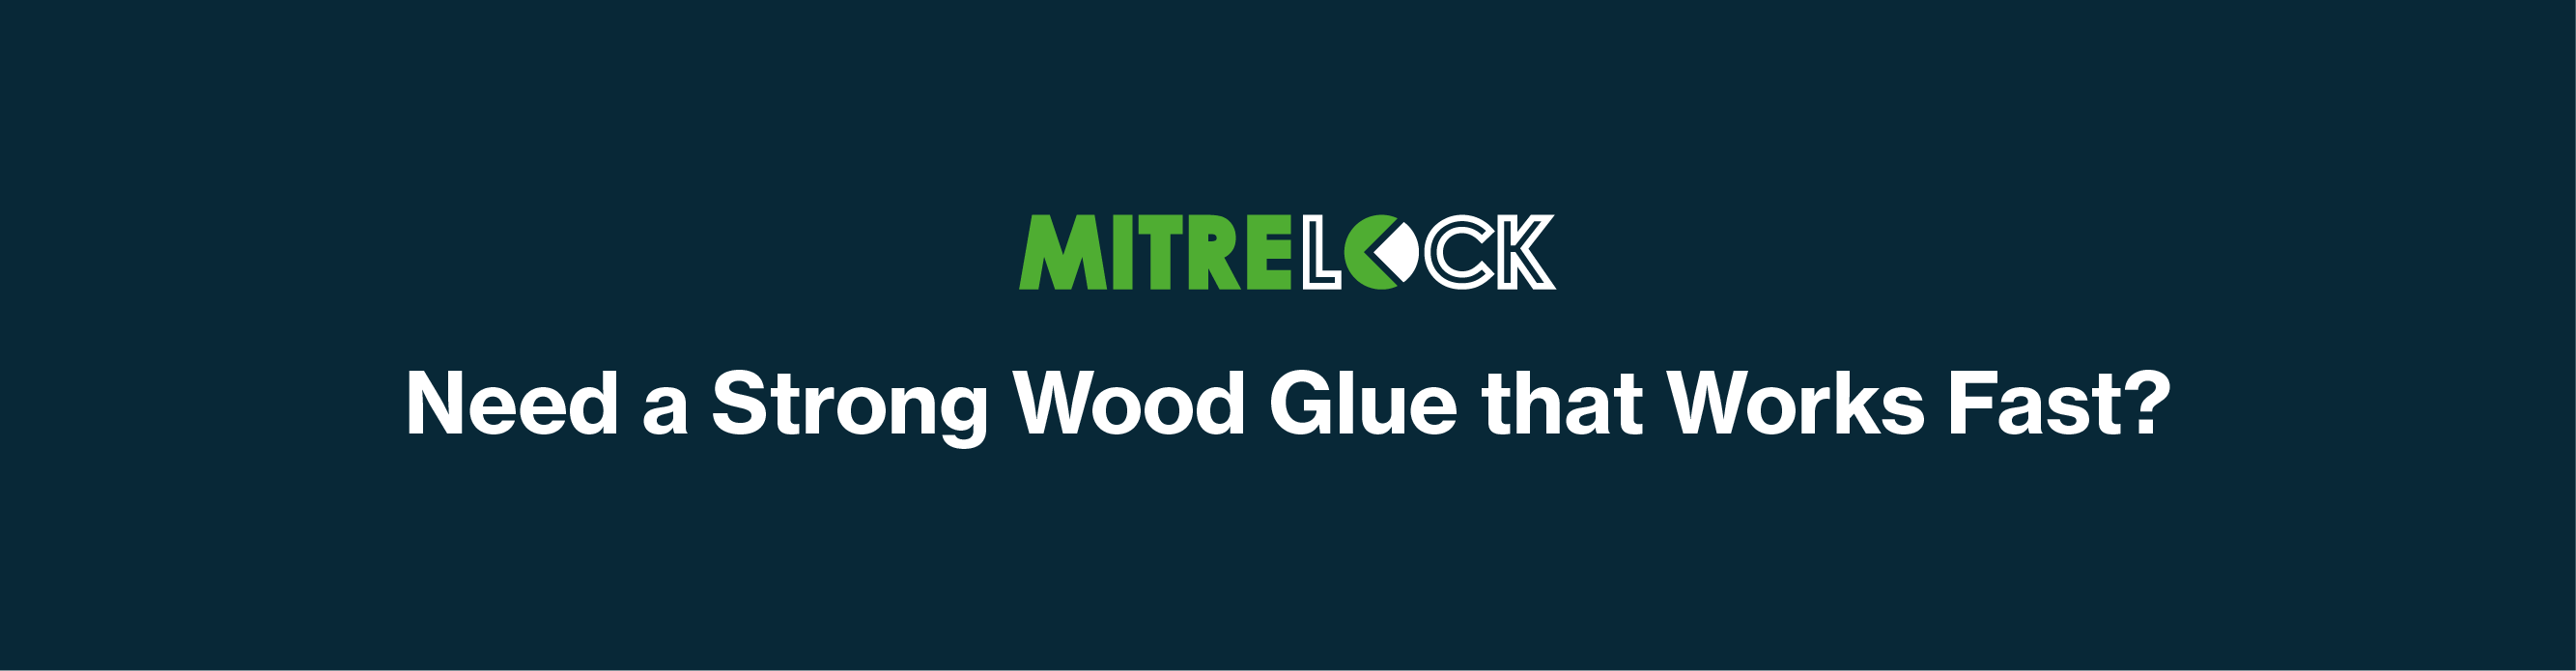 Need a Strong Wood Glue that Works Fast?